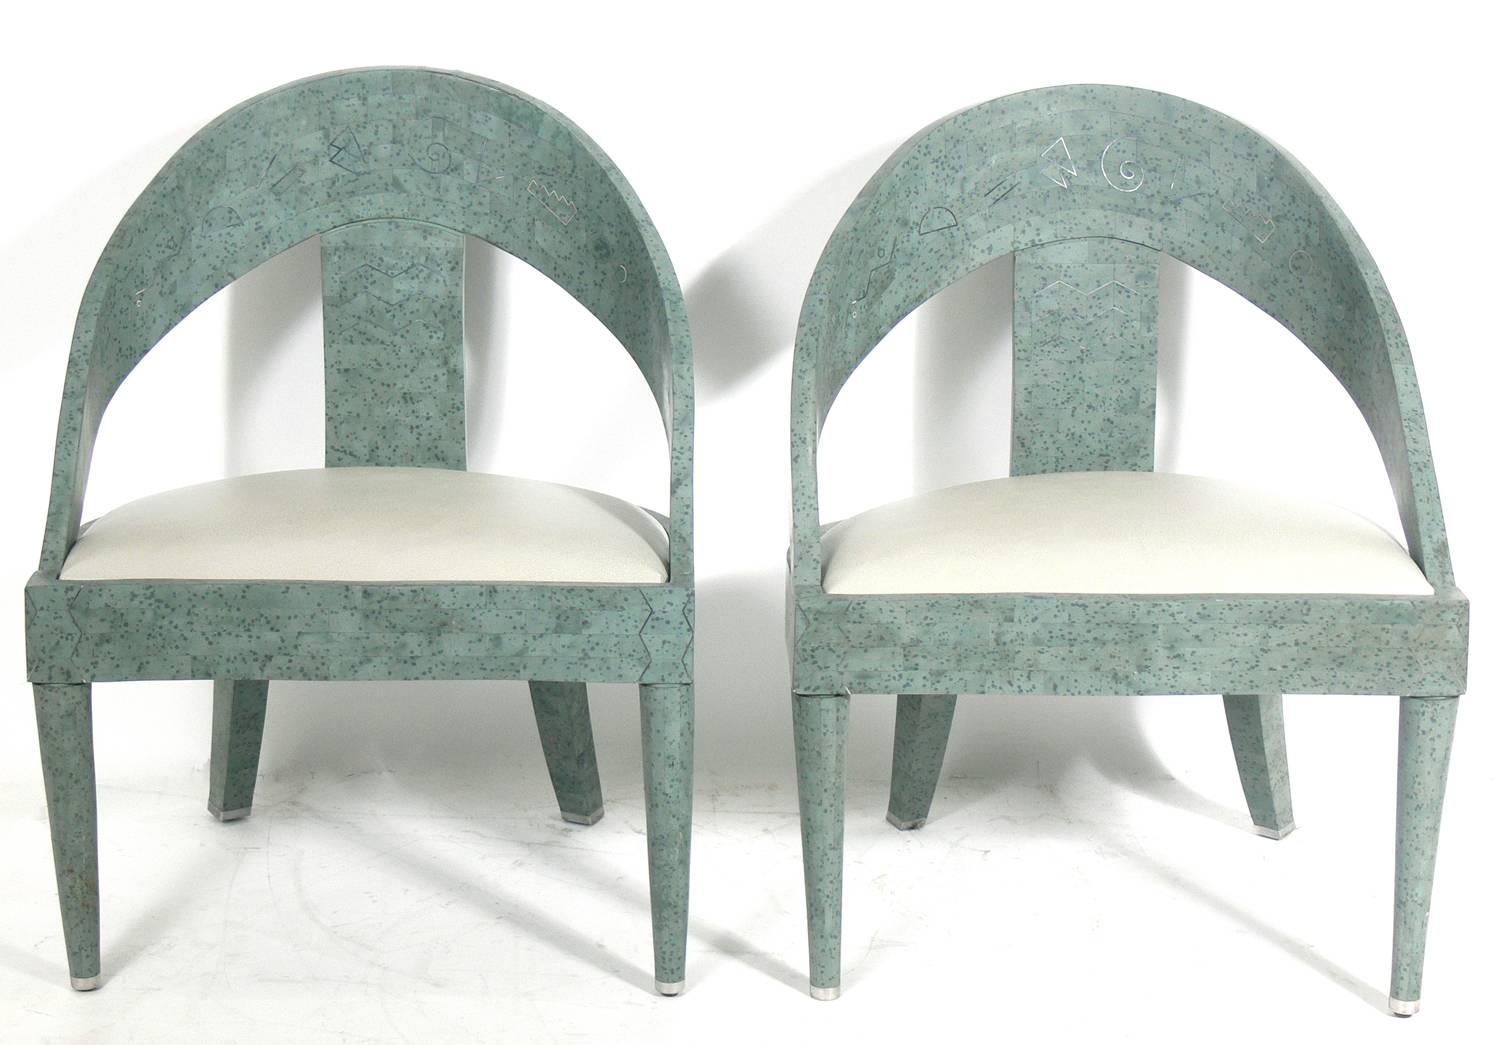 Pair of tessellated lounge chairs with silver inlay, American, circa 1980s. They are believed to be constructed of tessellated horn with a mottled green finish and silver inlaid designs. They have been reupholstered in a gray Edelman leather.